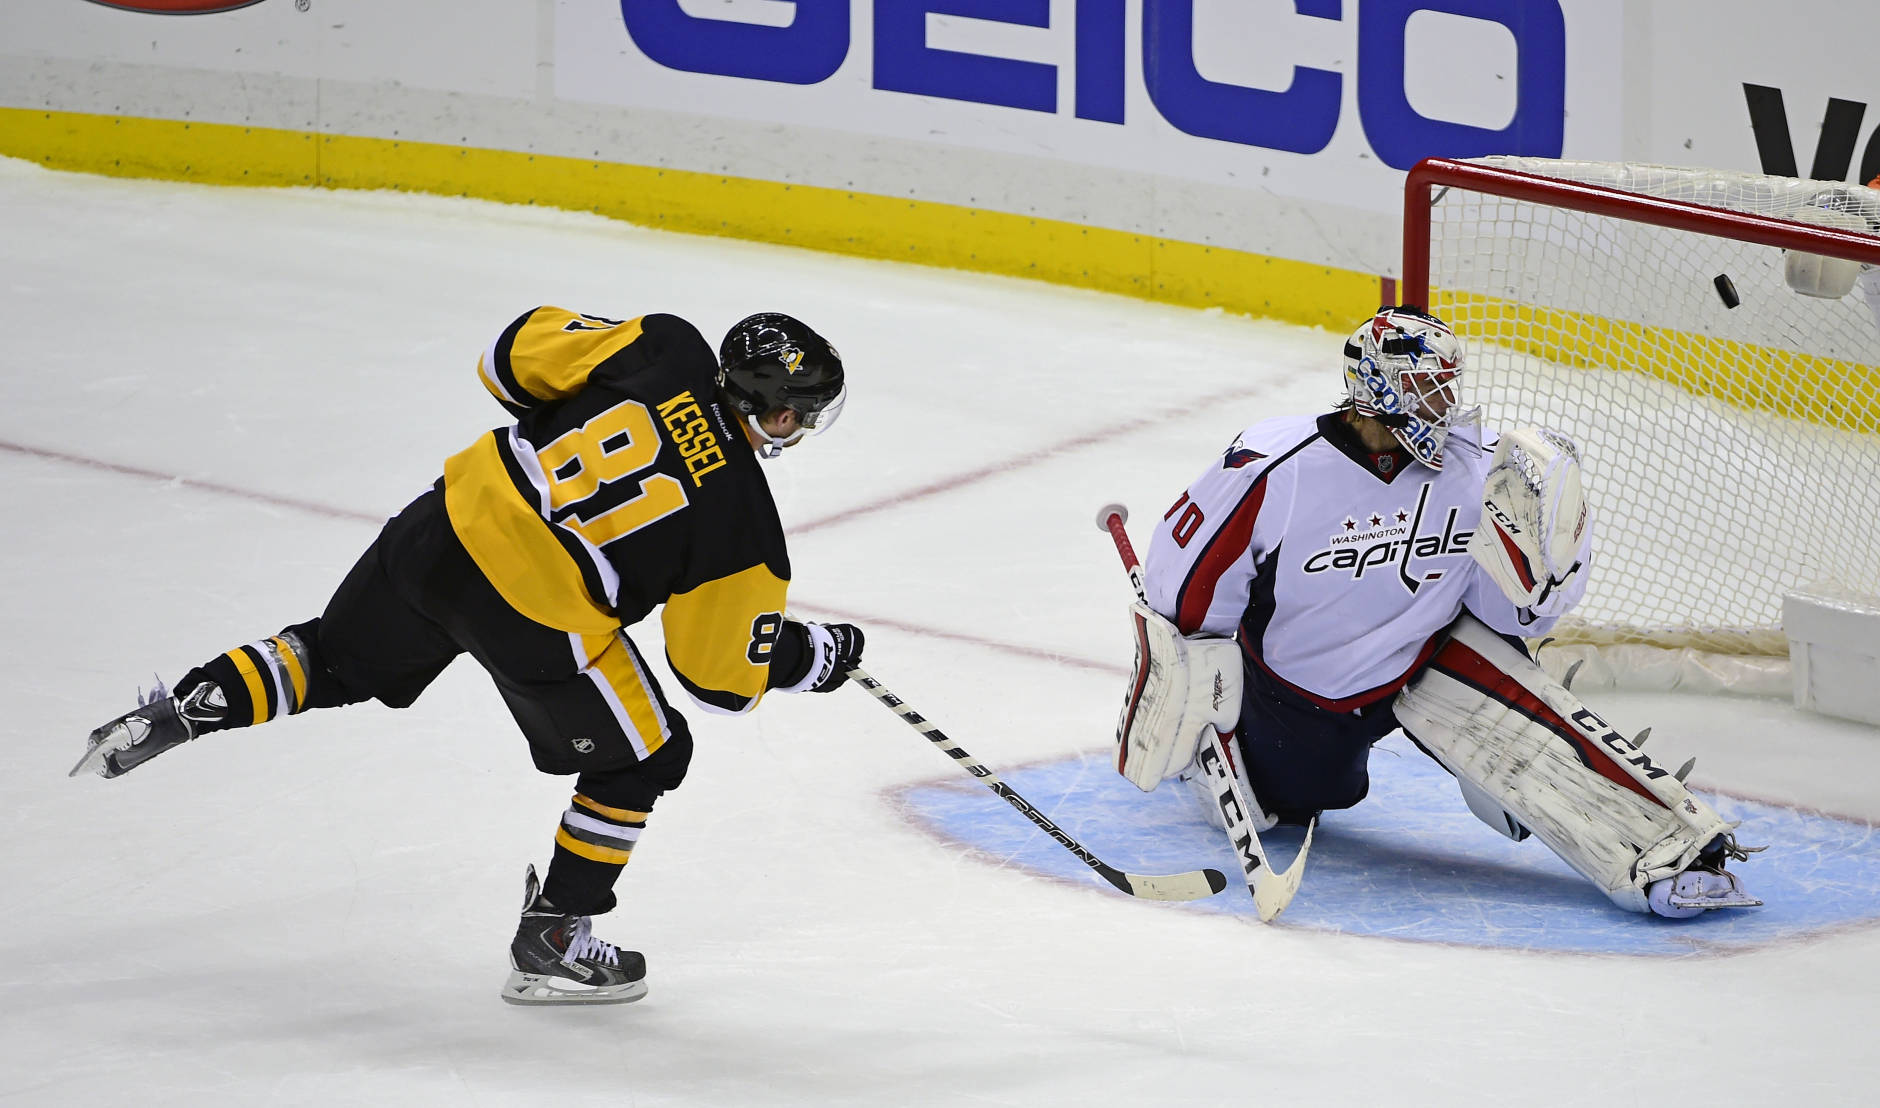 Pittsburgh Penguins right wing Phil Kessel (81) scores on Washington Capitals goalie Braden Holtby (70) during the shootout in an NHL hockey game Thursday, Oct. 13, 2016, in Pittsburgh. The Penguins won 3-2. (AP Photo/Fred Vuich)